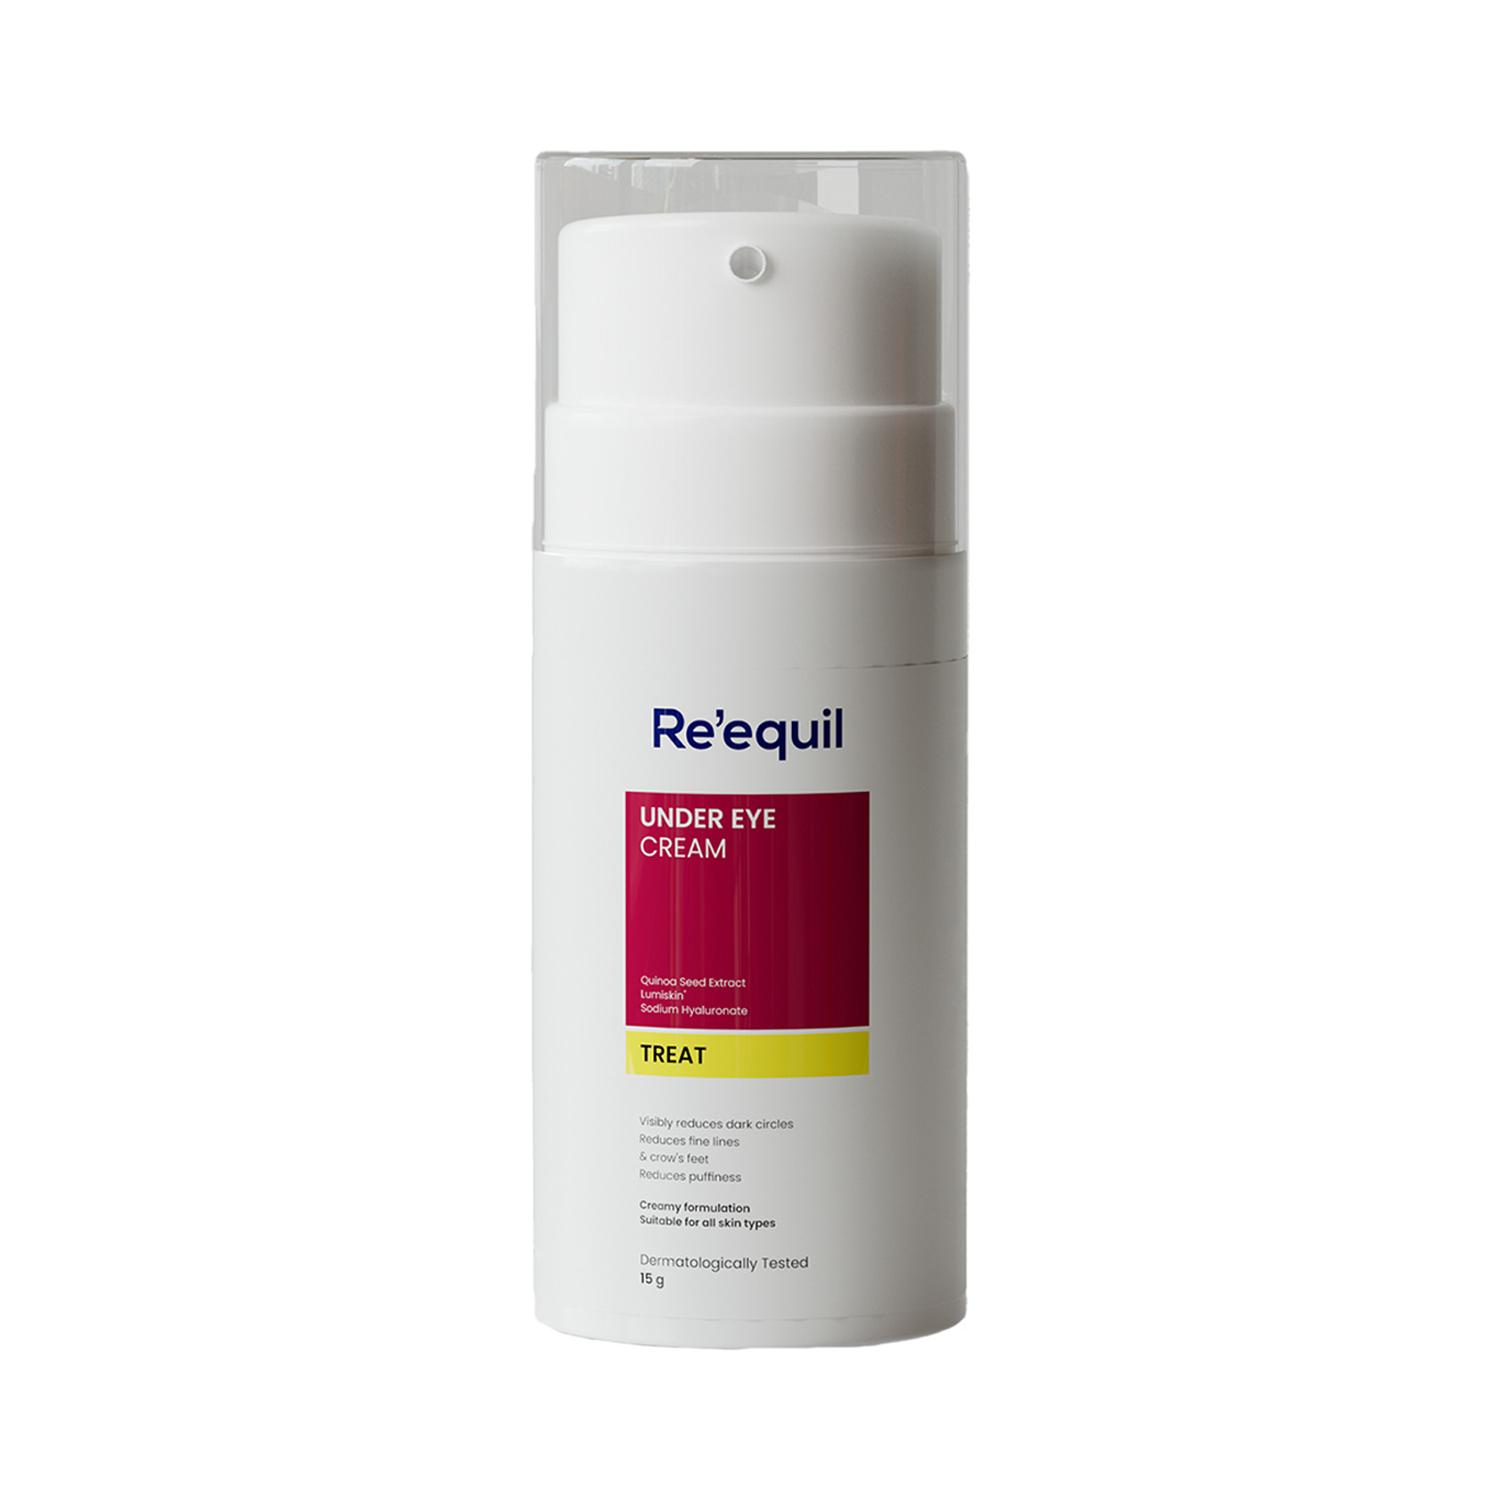 Re'equil | Re'equil Under Eye Cream Fades Dark Circles and Crow's Feet For Unisex For All Skin Types